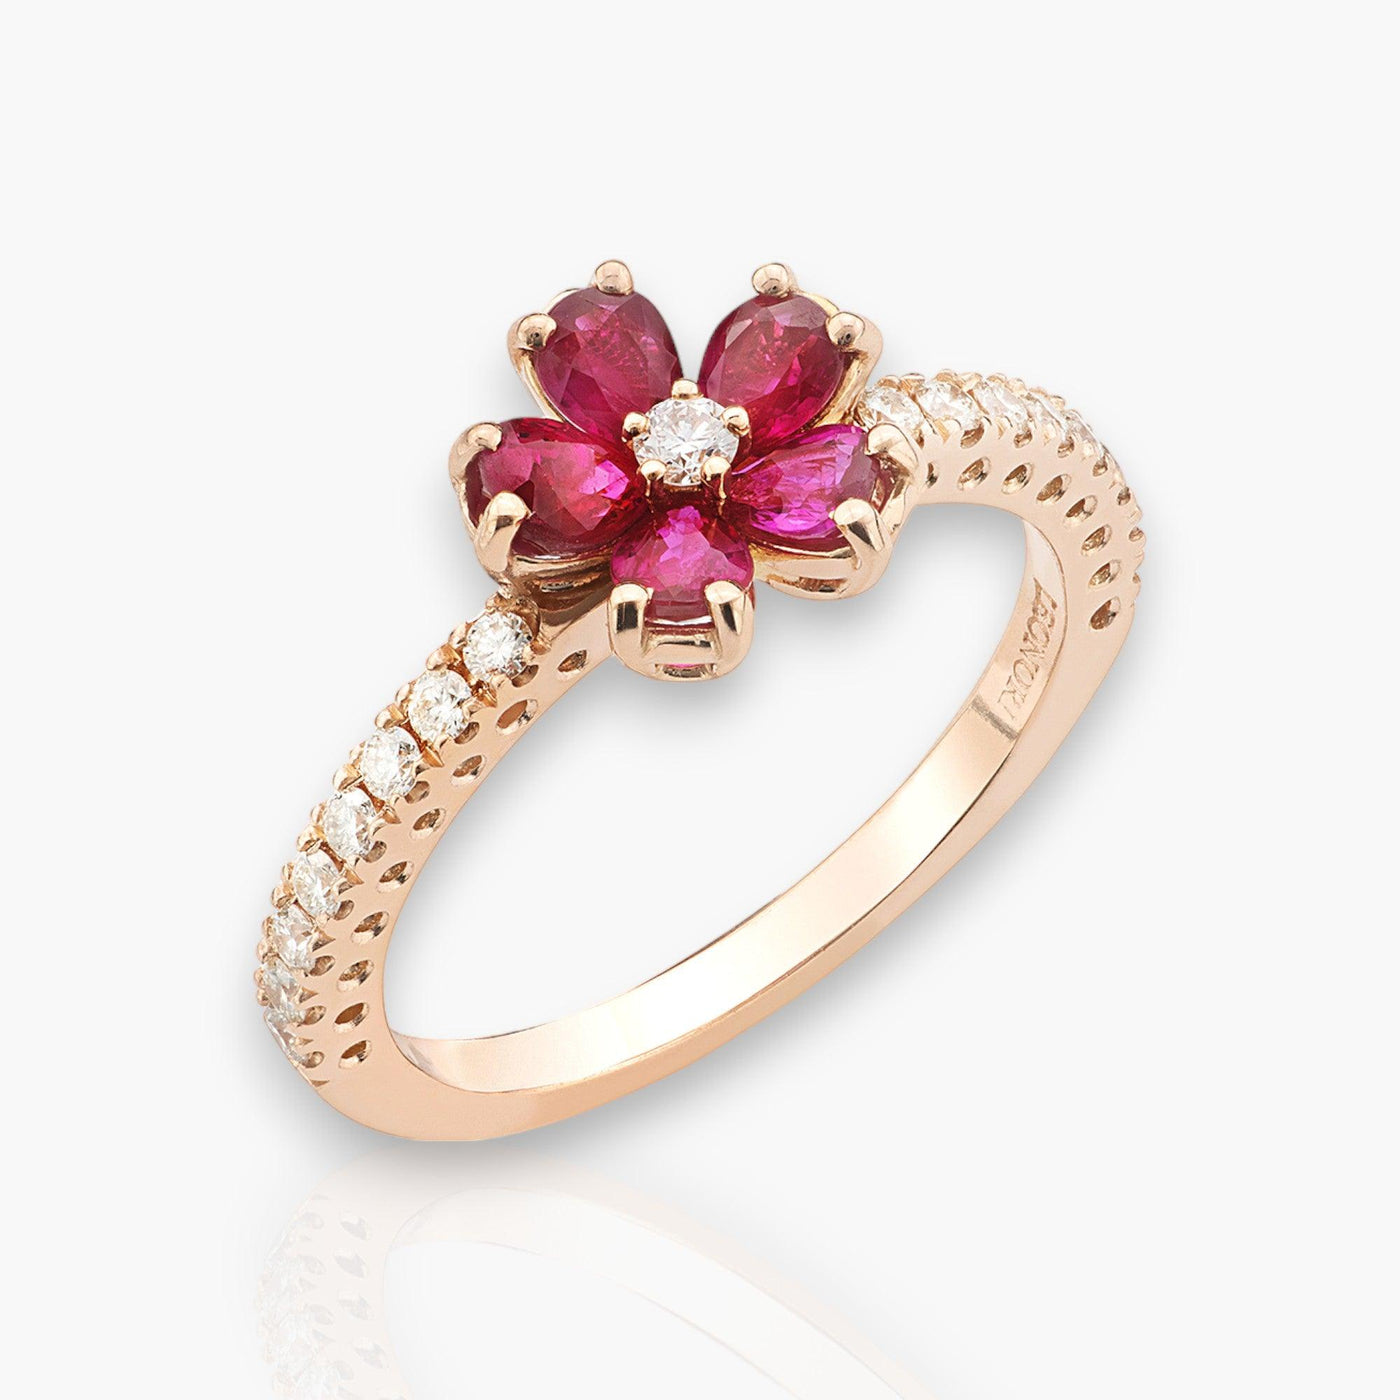 Ring "Cherry Blossom", Rose Gold, Diamonds And Rubies - Moregola Fine Jewelry